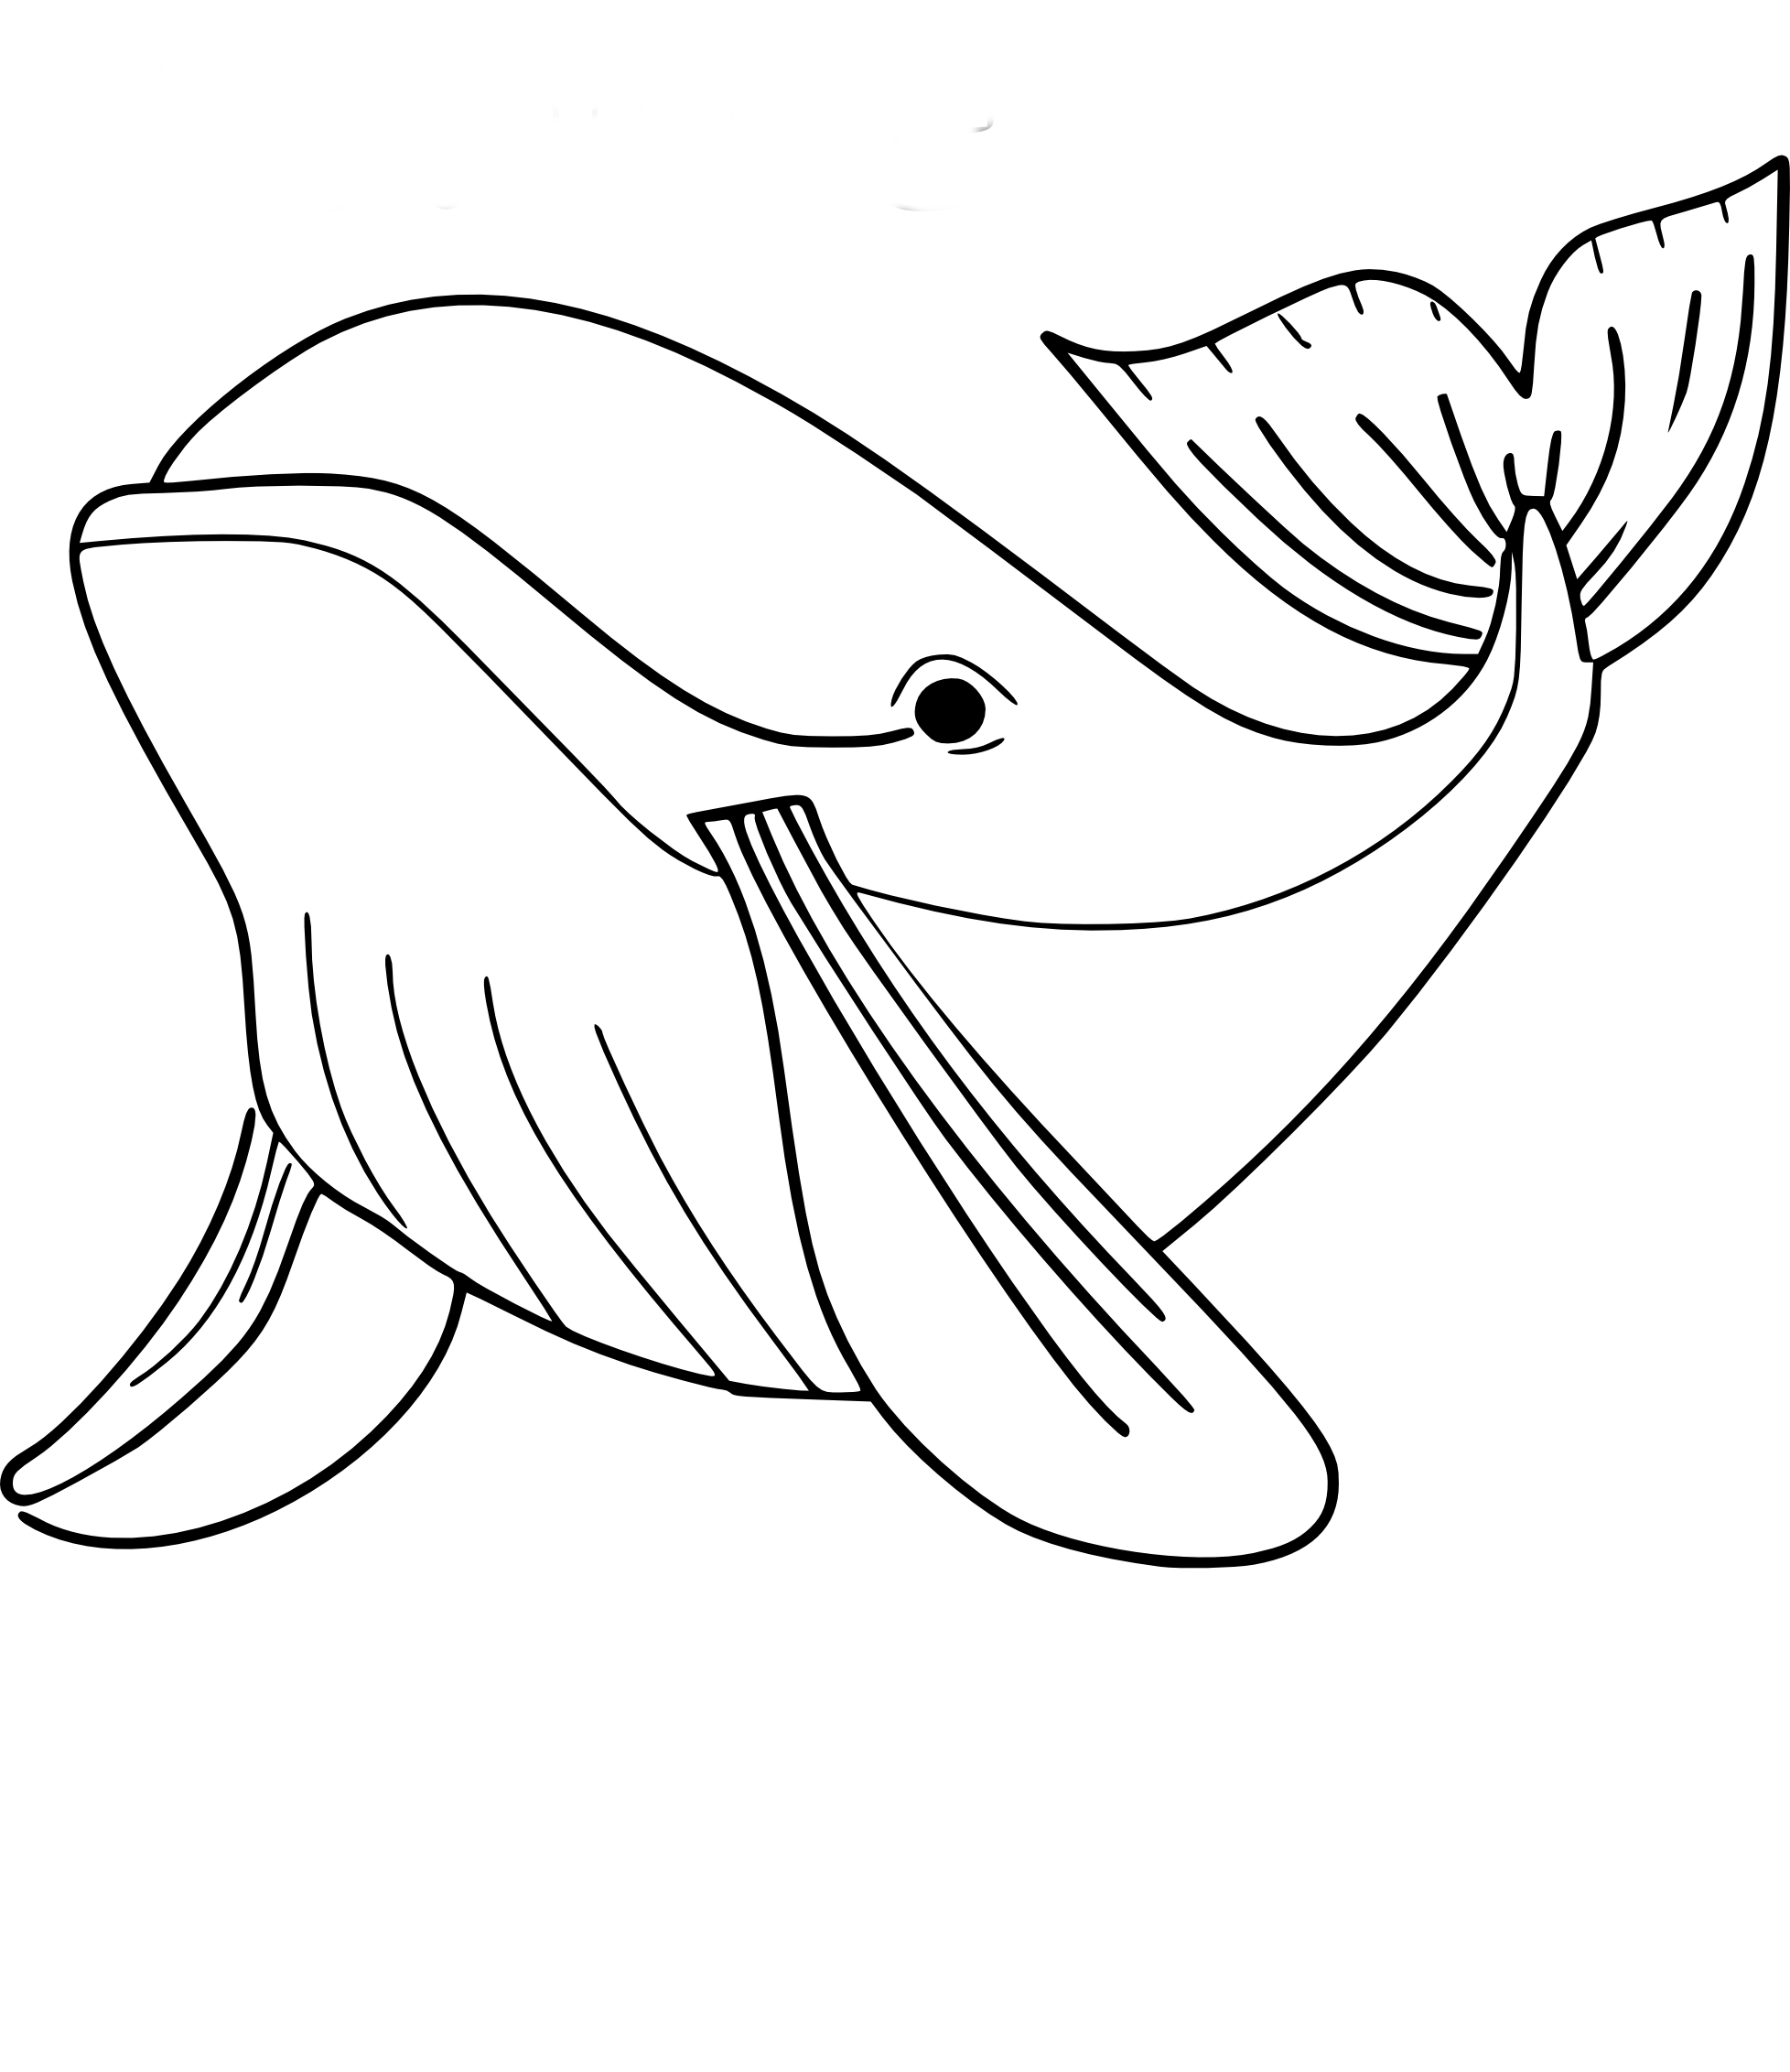 Free Whale coloring page